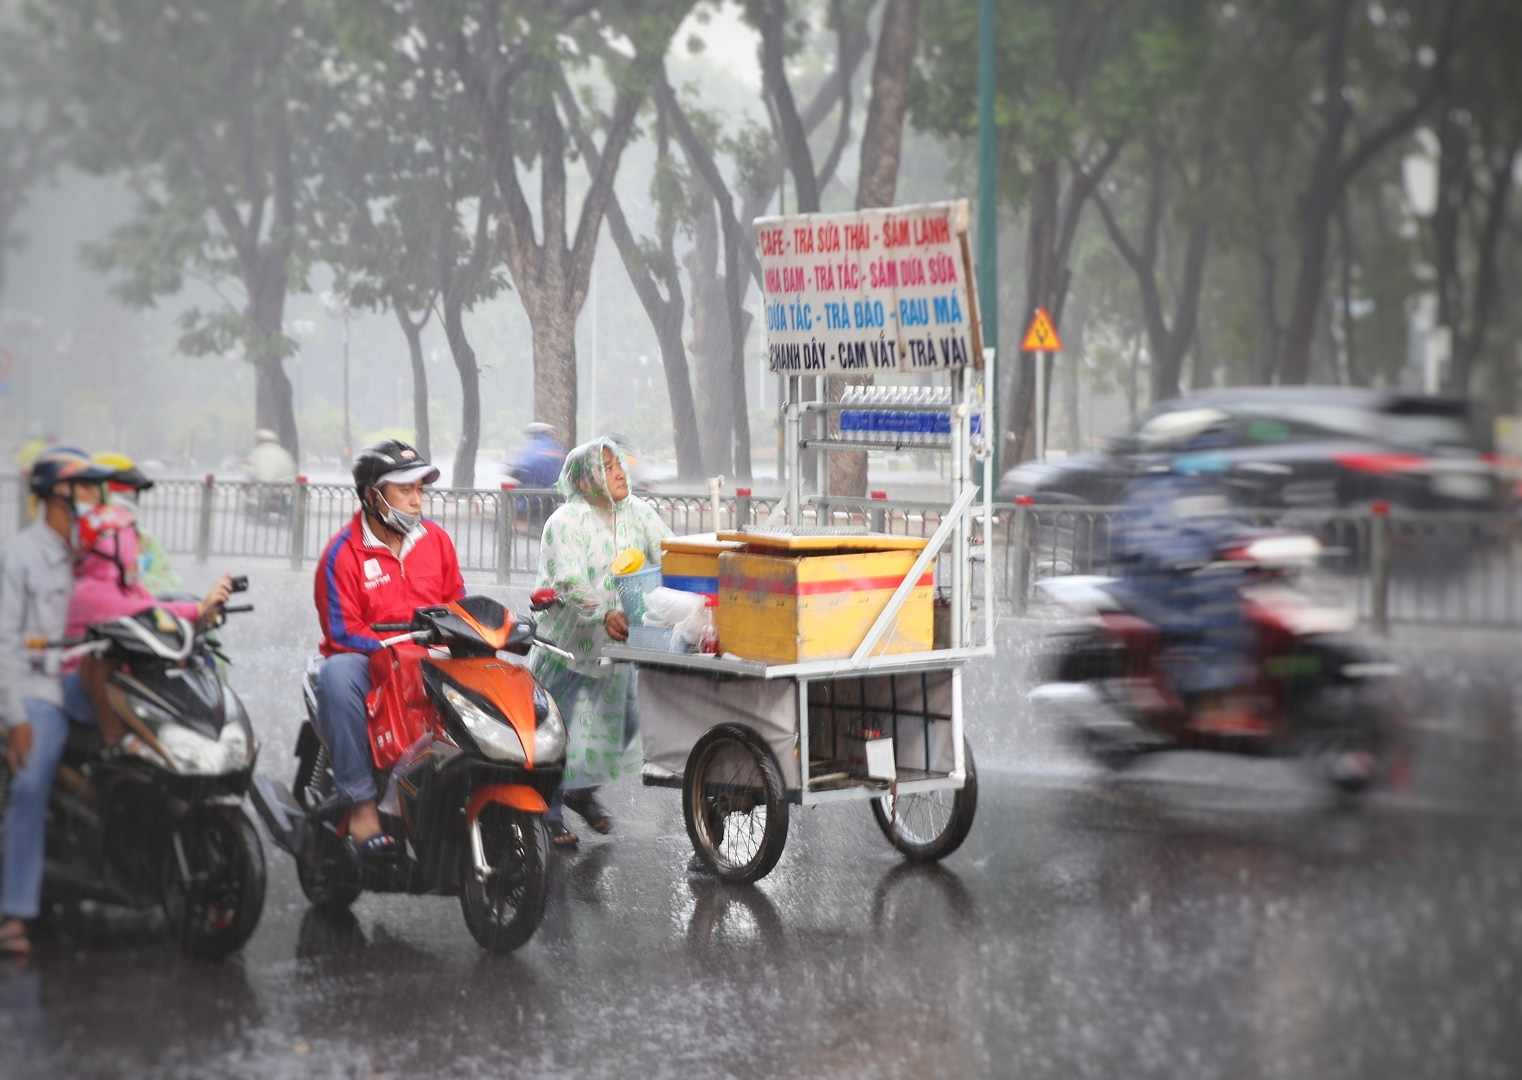 Rain, thunderstorms to batter southern Vietnam over next 8 days